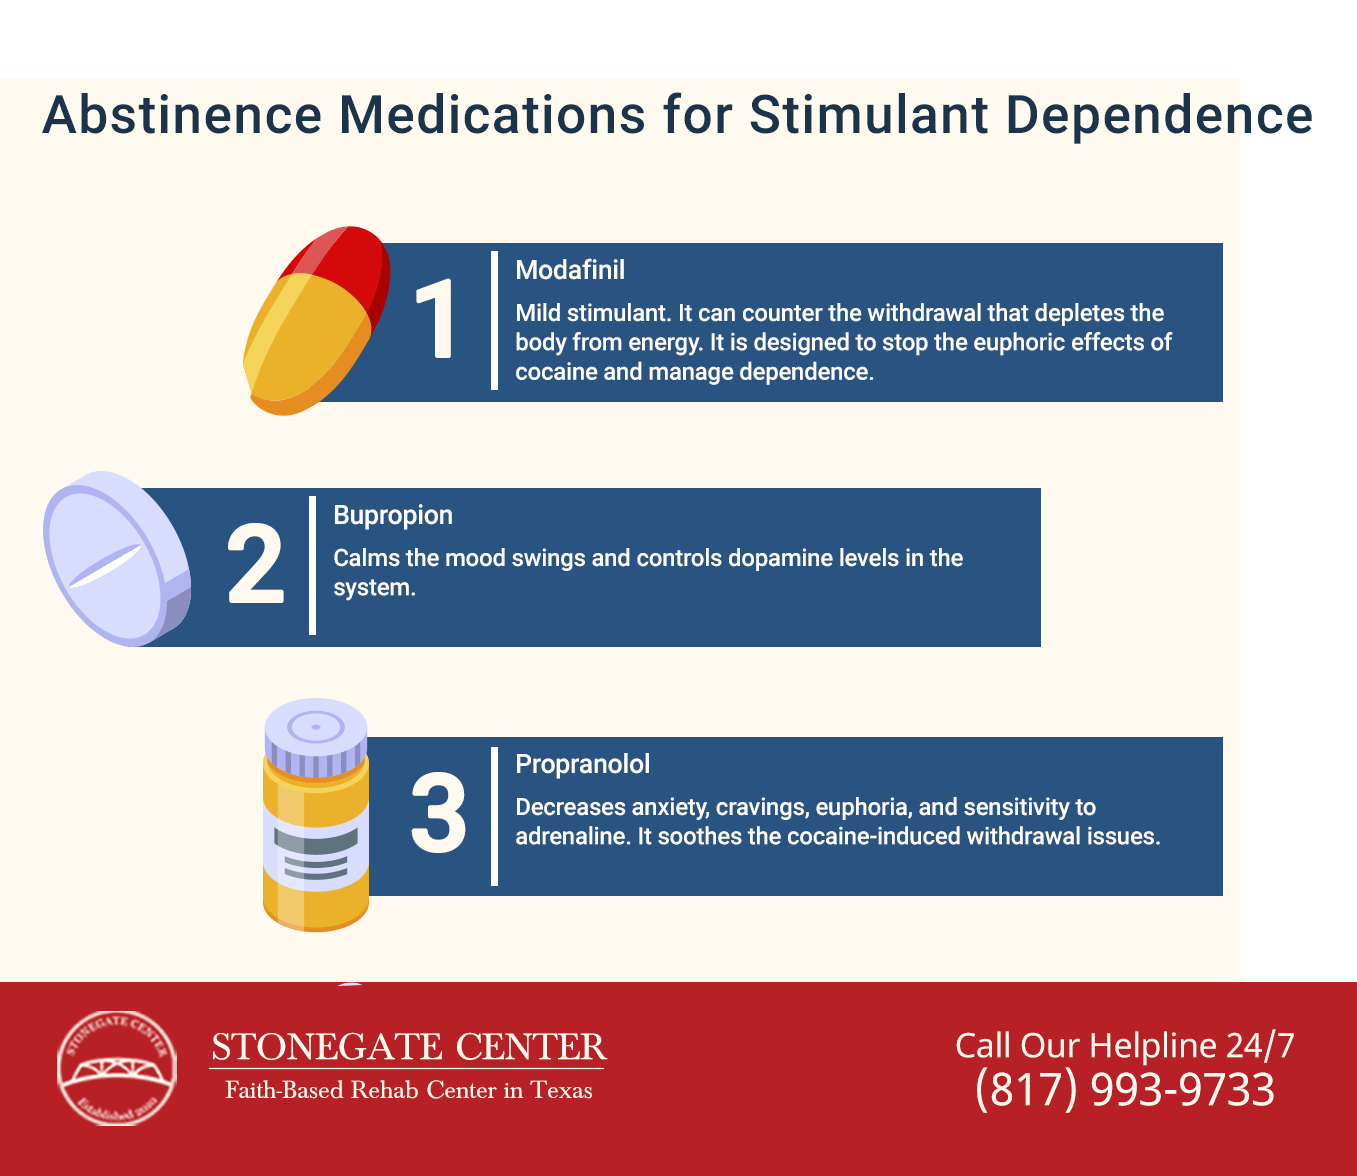 Stonegate Center Blog - Promising Medications to Treat Stimulant Dependence - Abstinence Medications Infographics